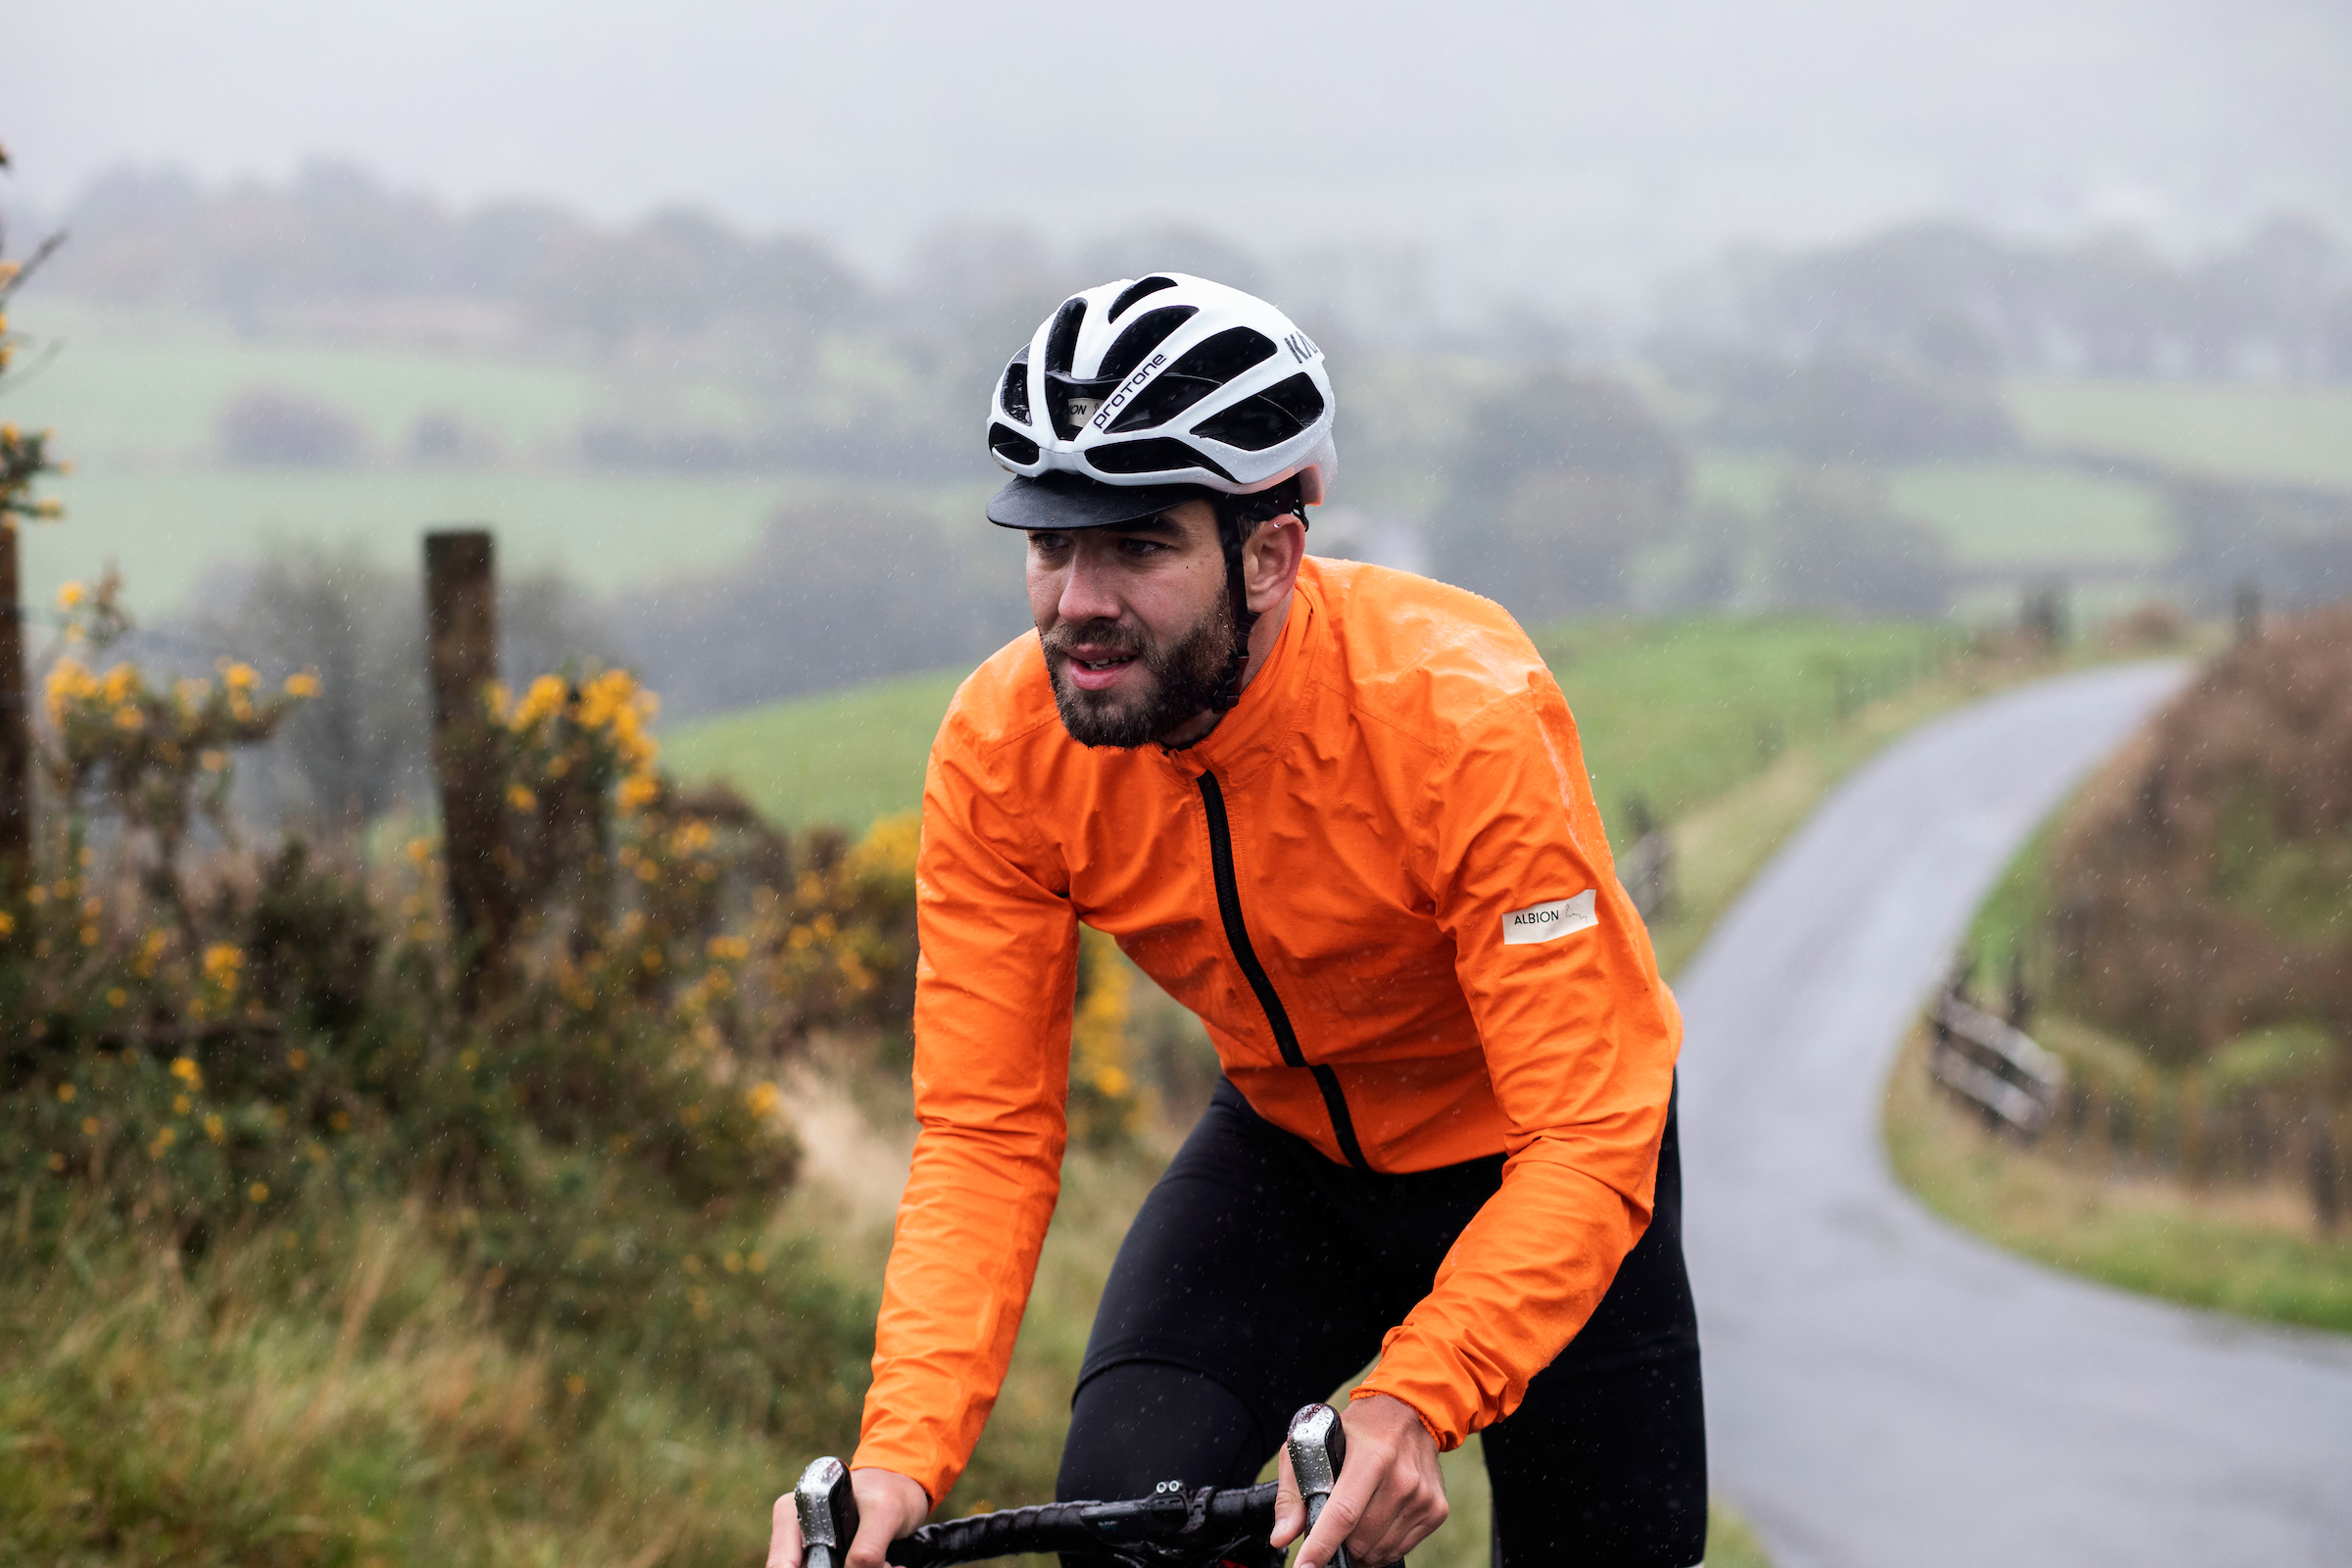 Clothing Care with Albion | How to look after your winter cycling kit at home